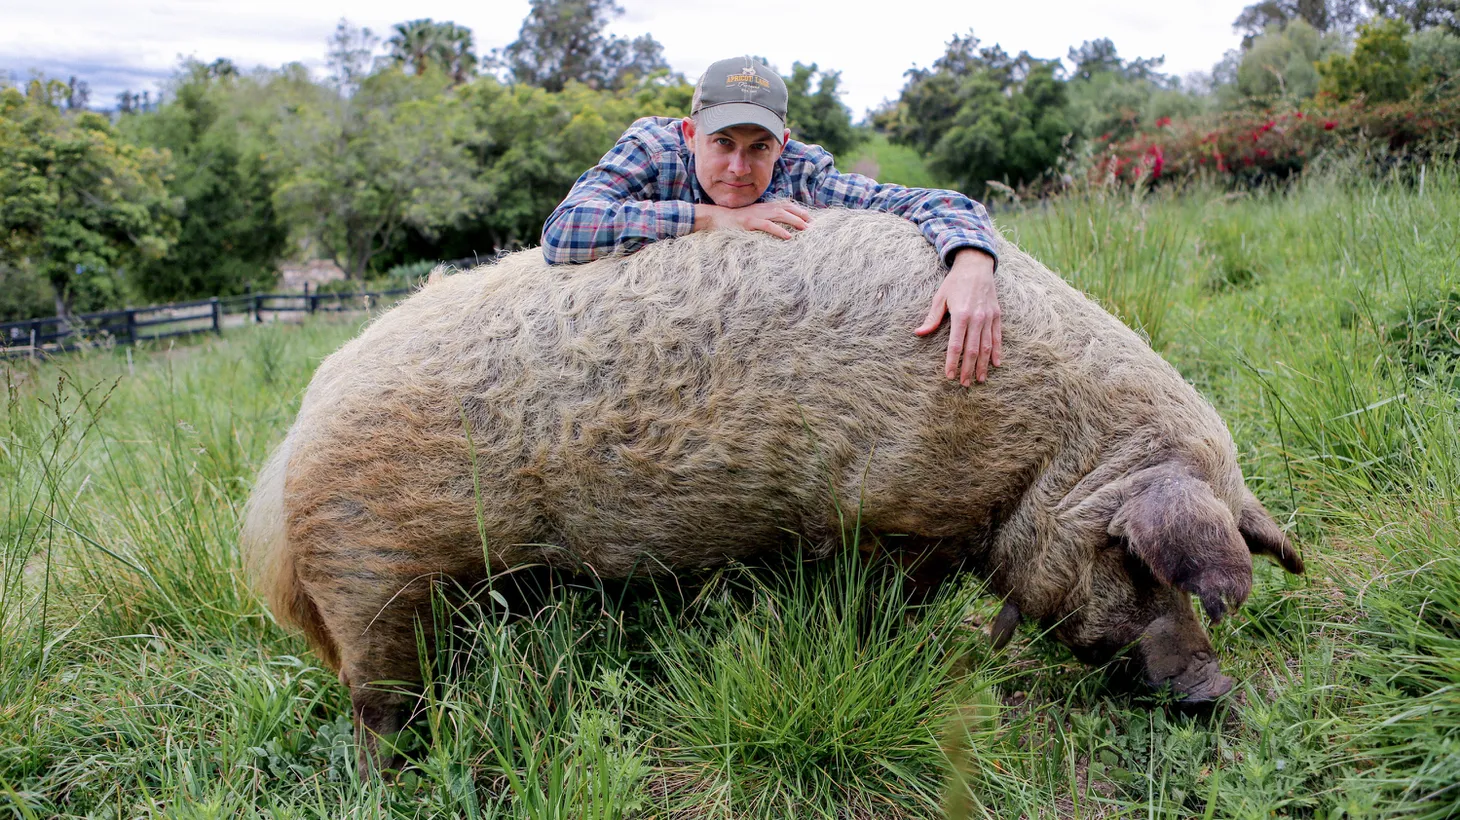 John Chester of Apricot Lane Farms says his pig Emma has “been a lot of heartache and lessons.” Emma, John, and his wife, Molly, are featured in “The Biggest Little Farm: The Return,'' debuting on Disney+ on Earth Day.